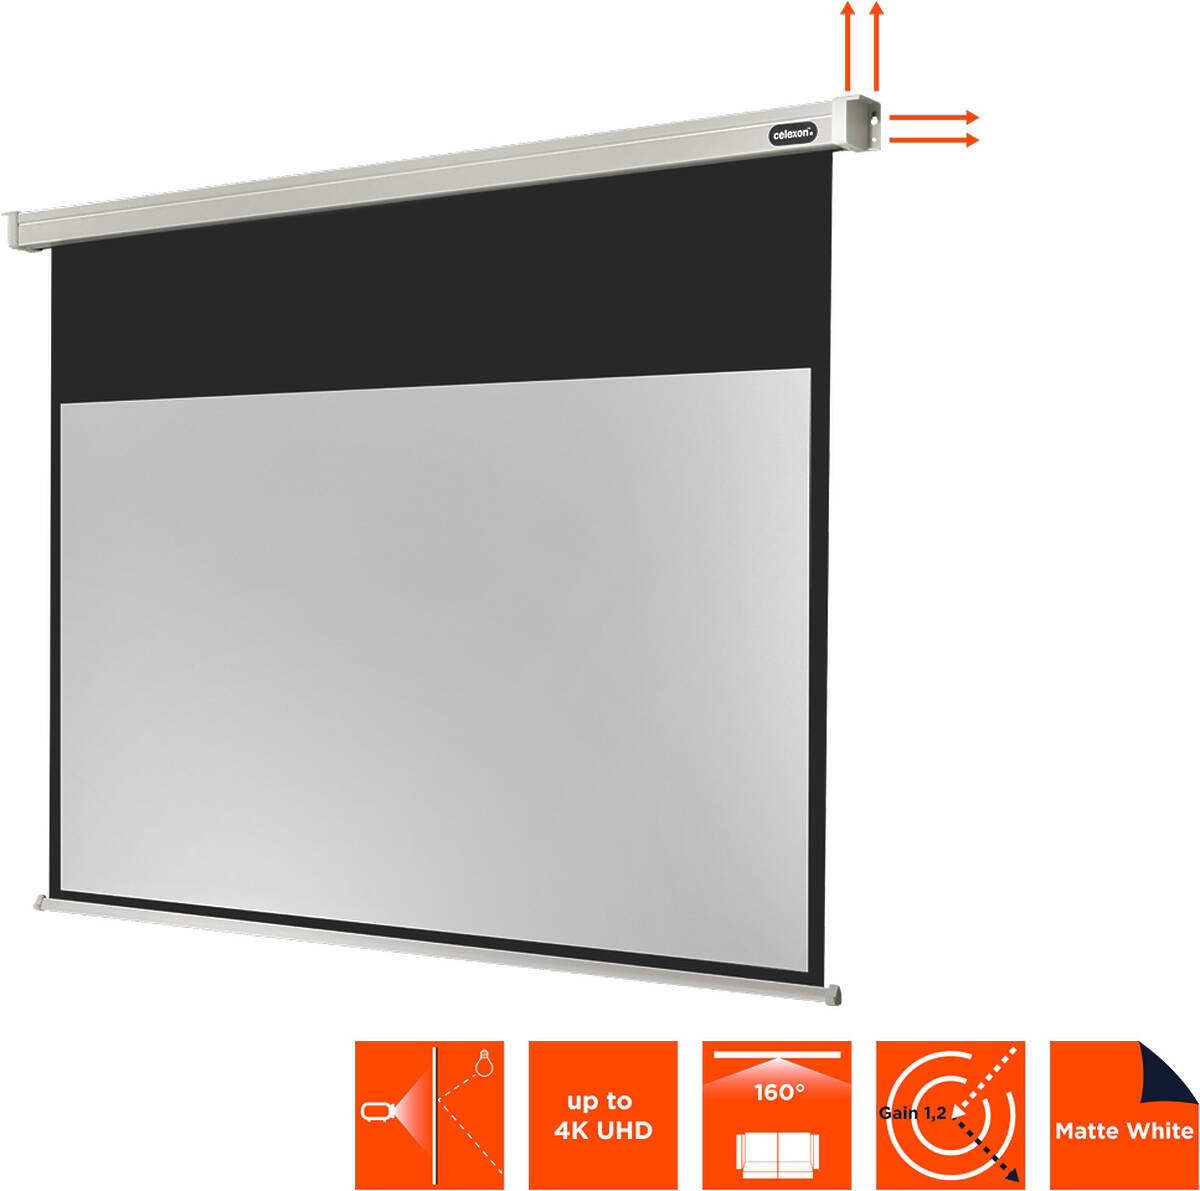 Celexon EP/270X152 122" (3.10m)
 16:9 aspect ratio projection screen product image. Click to enlarge.